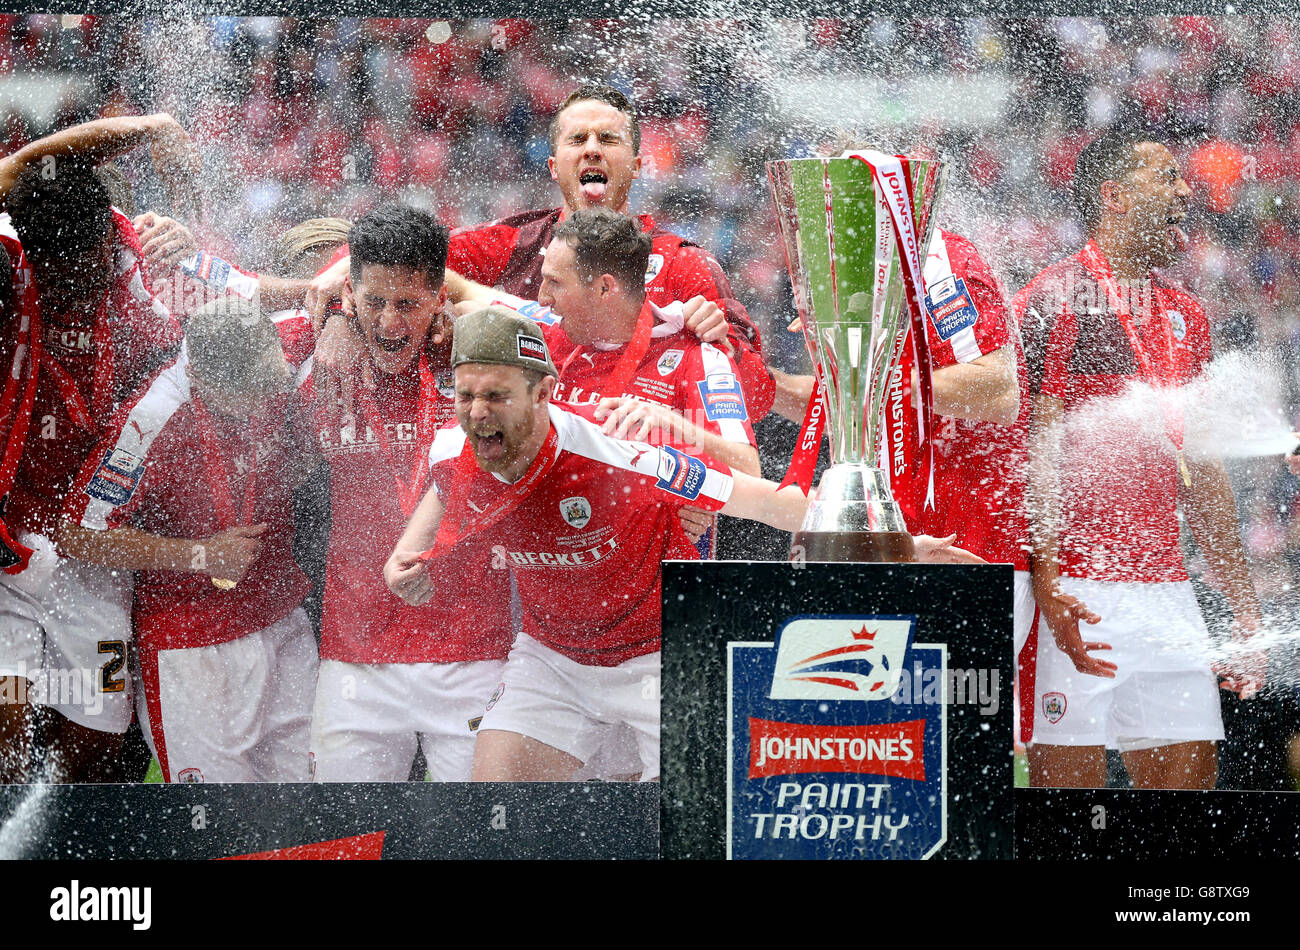 Barnsley players celebrate with the Johnstone's Paint Trophy after the Johnstone's Paint Trophy final at Wembley Stadium, London. PRESS ASSOCIATION Photo. Picture date: Sunday April 3, 2016. See PA story SOCCER Final. Photo credit should read: Adam Davy/PA Wire. Stock Photo